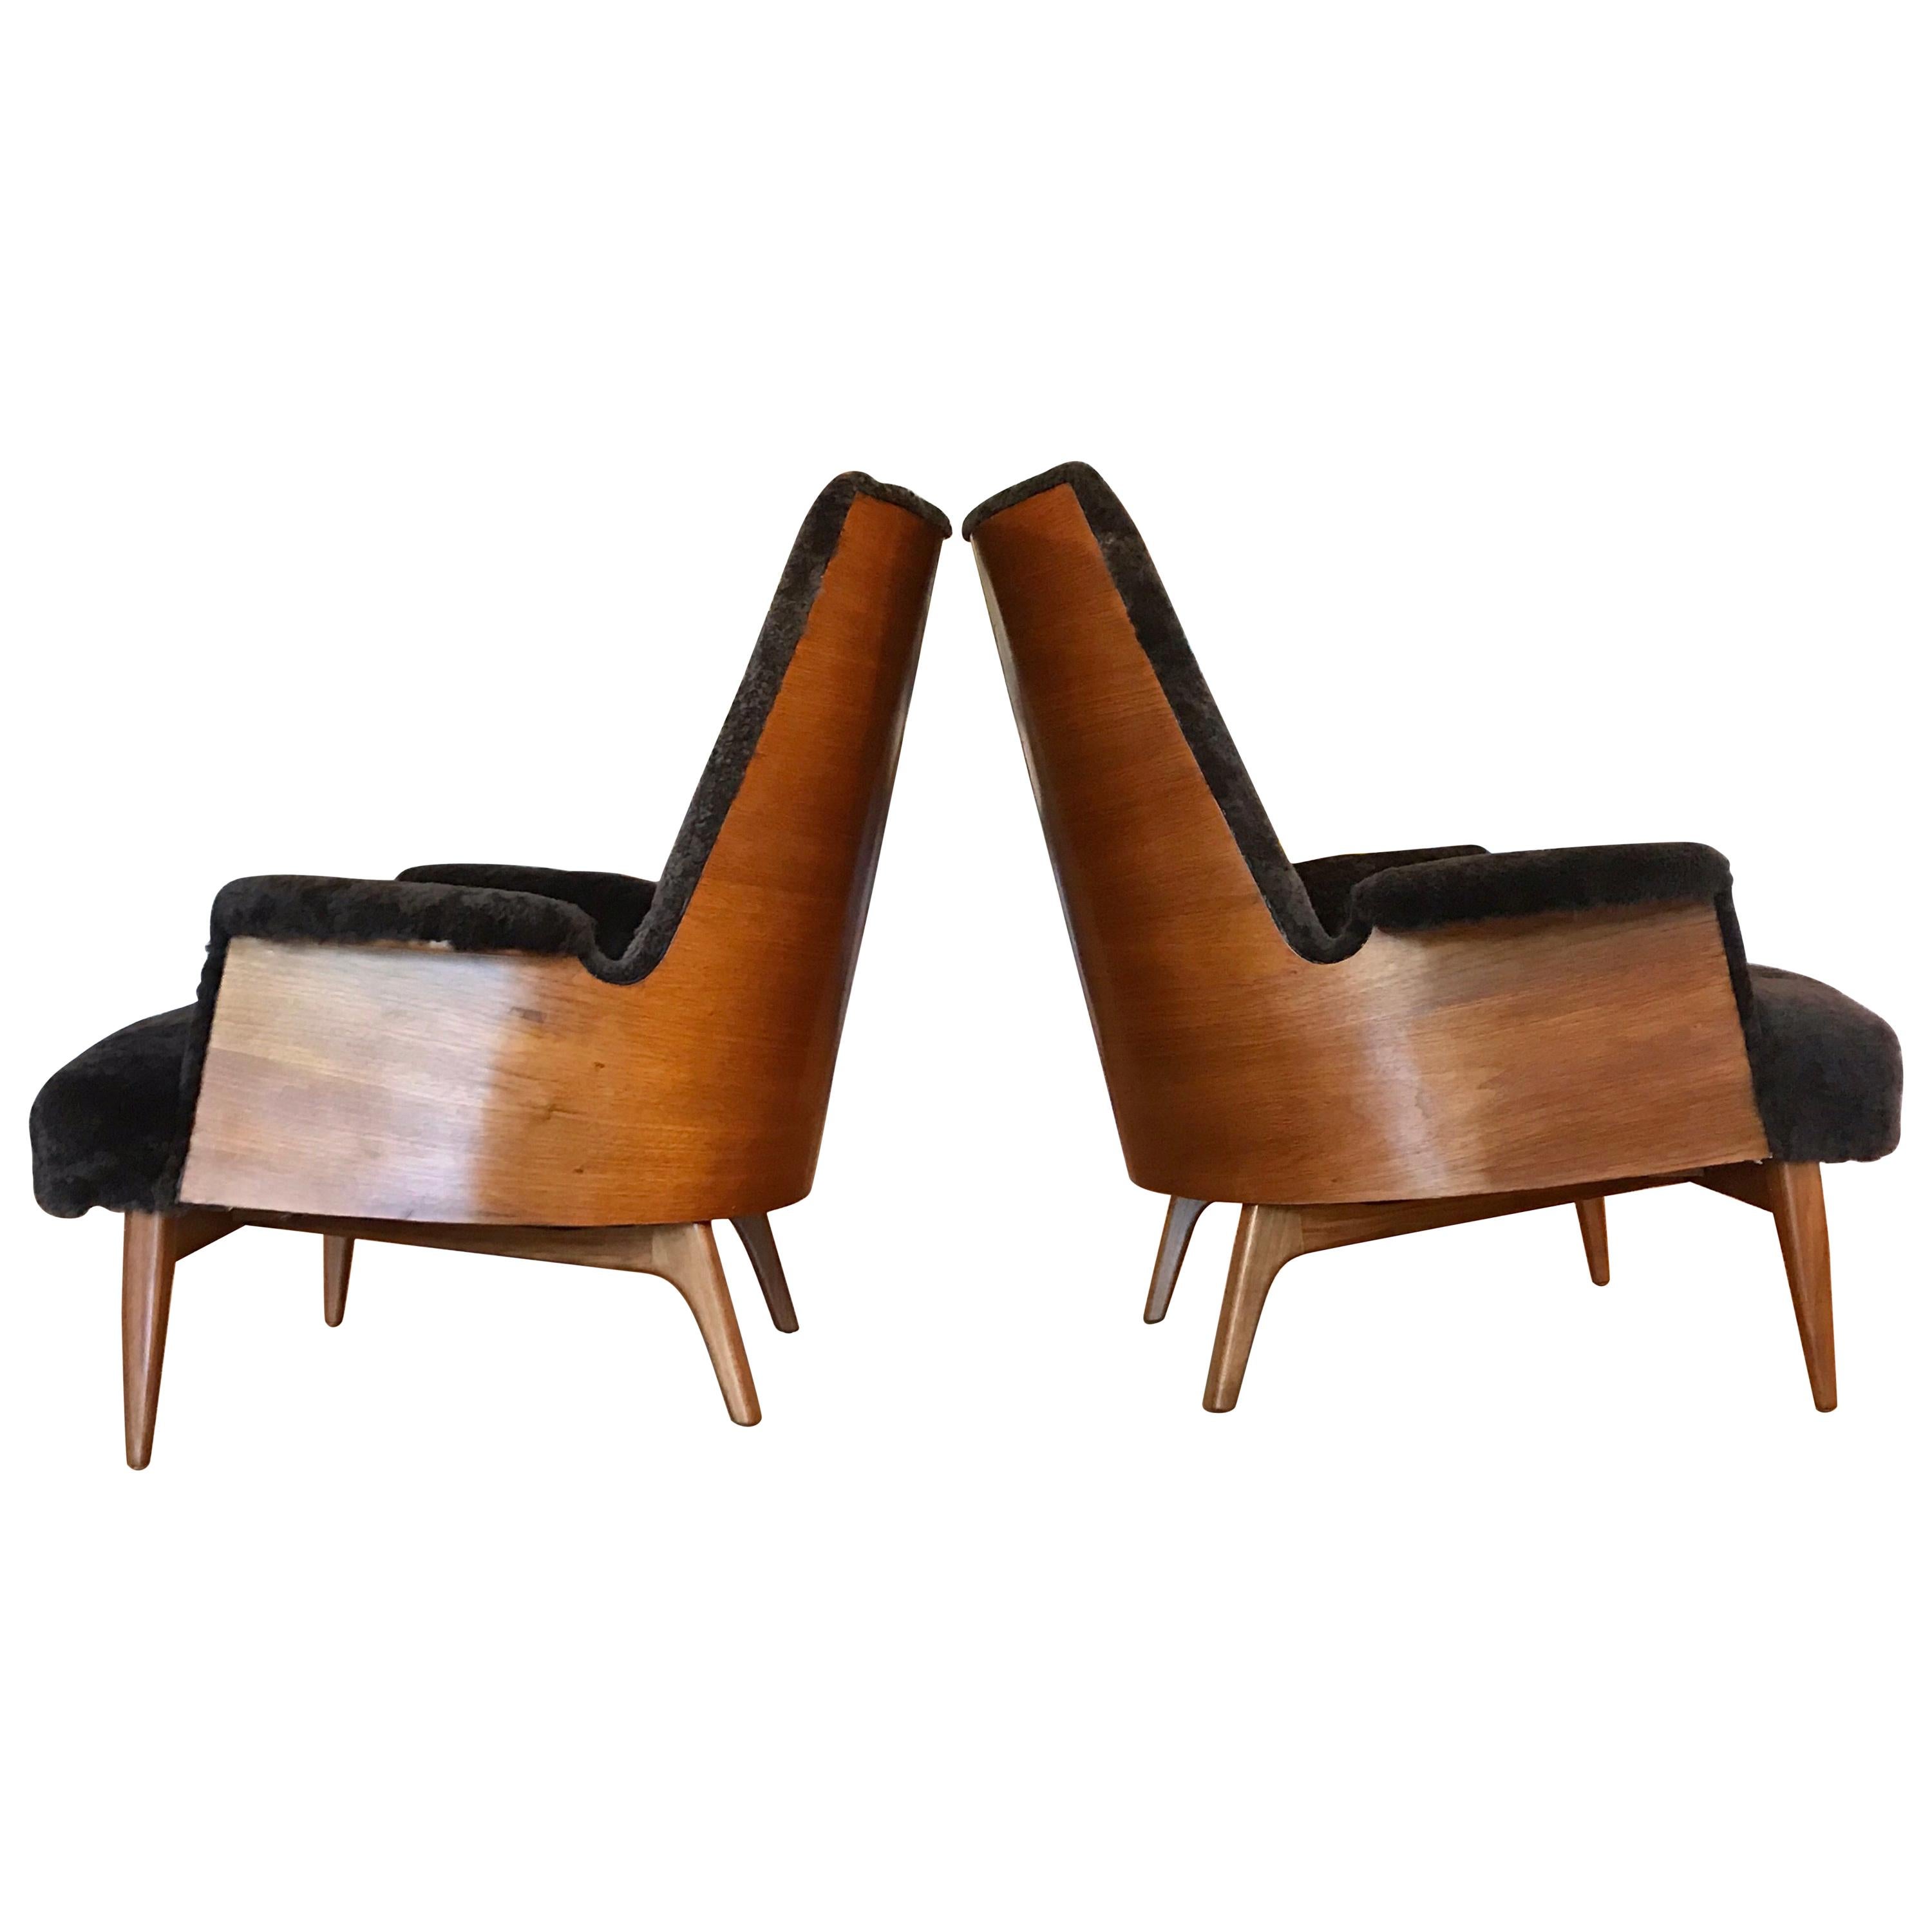 Bent Wood Lounge Chairs with Sheepskin Upholstery, 20th Century